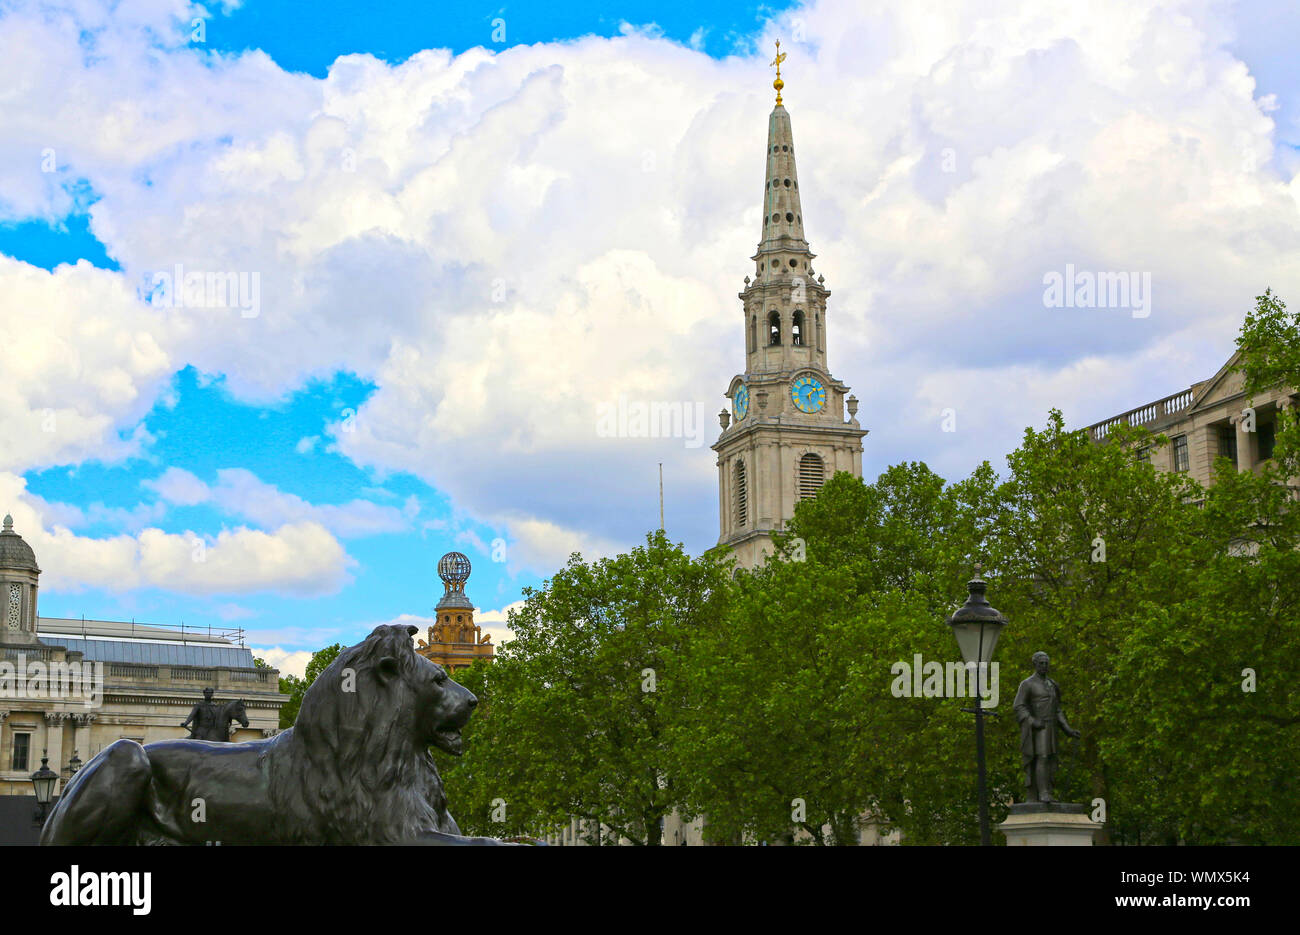 London, Great Britain -May 23, 2016: the bronze Lion statue at Nelson's Column by Sir Edwin Landseer, Trafalgar Square Stock Photo